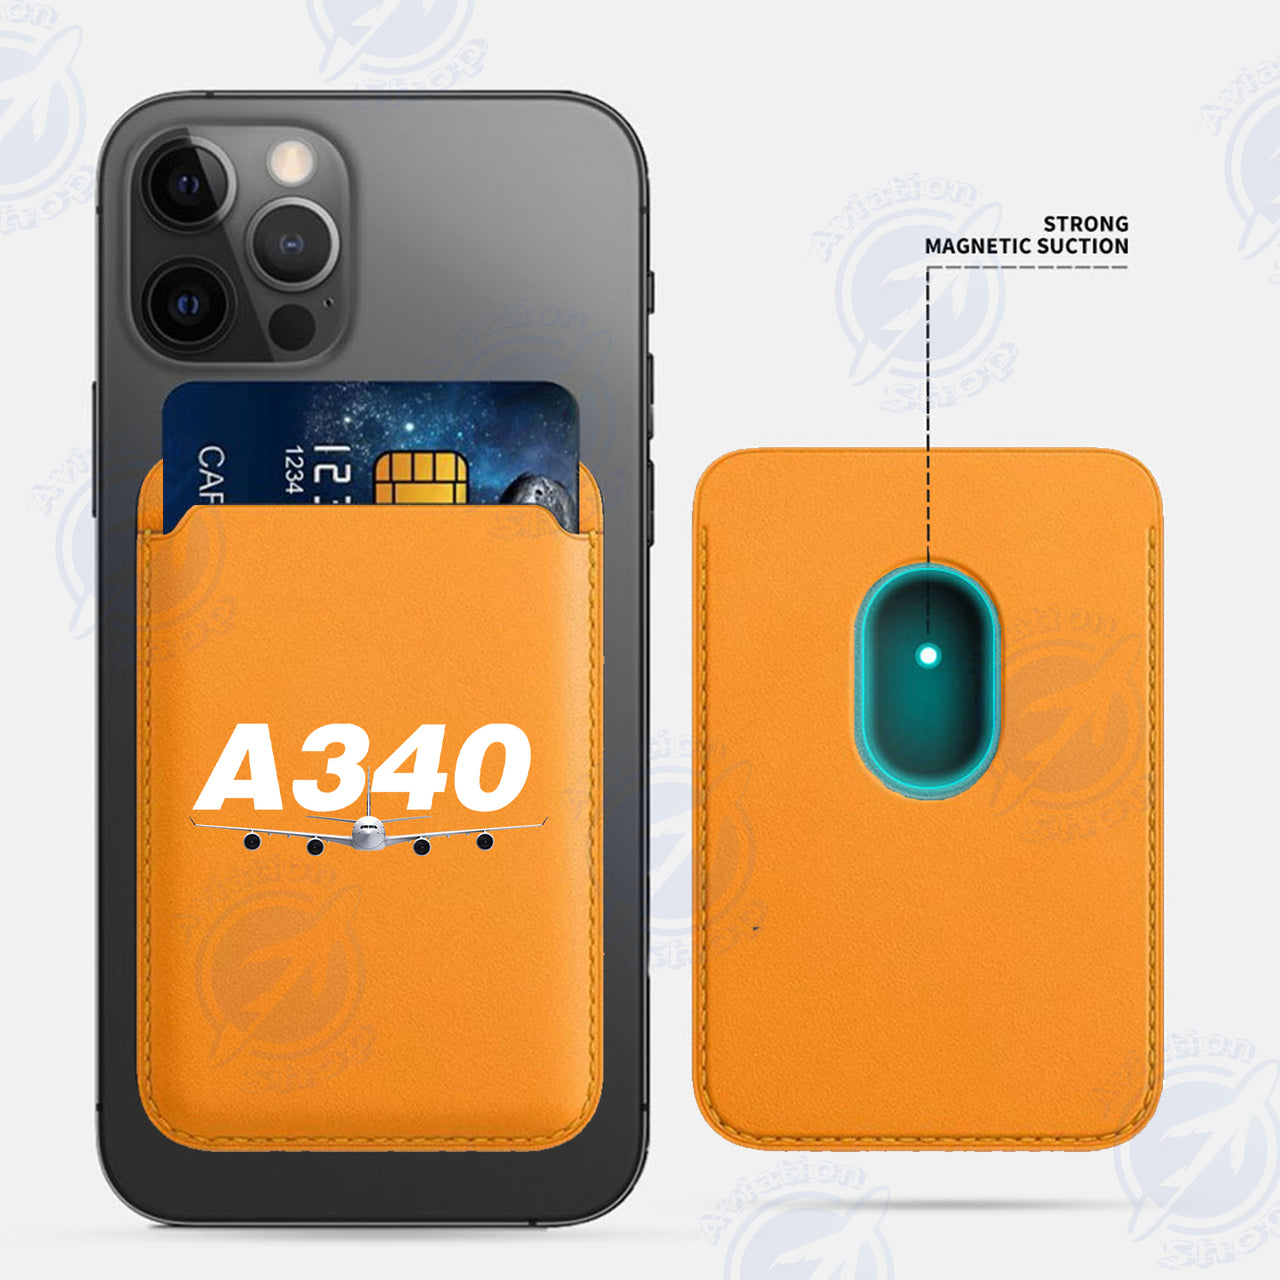 Super Airbus A340 iPhone Cases Magnetic Card Wallet